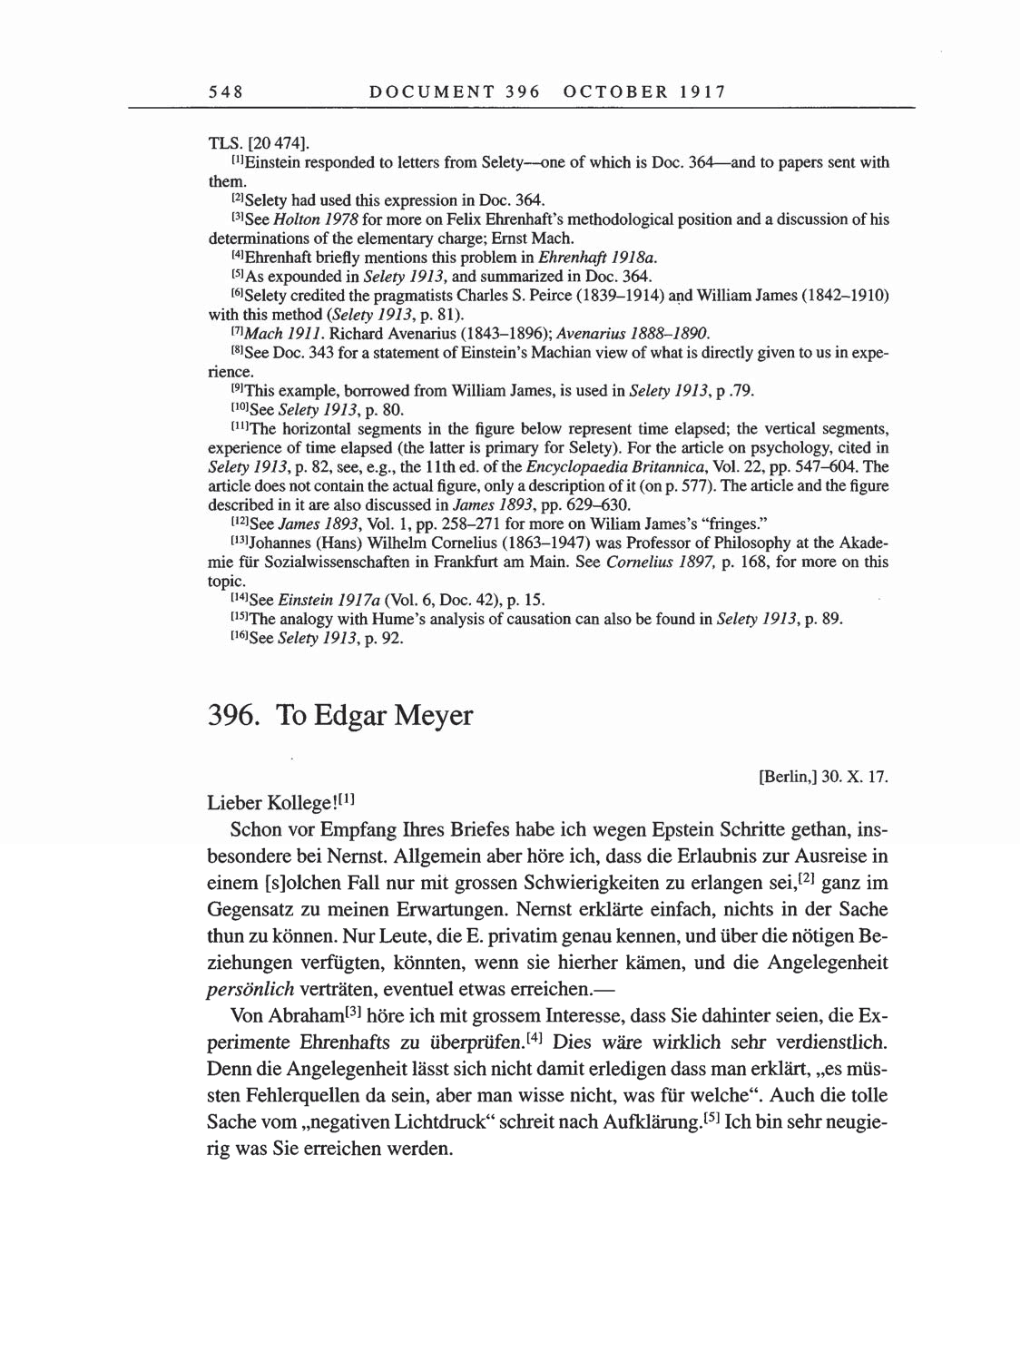 Volume 8, Part A: The Berlin Years: Correspondence 1914-1917 page 548